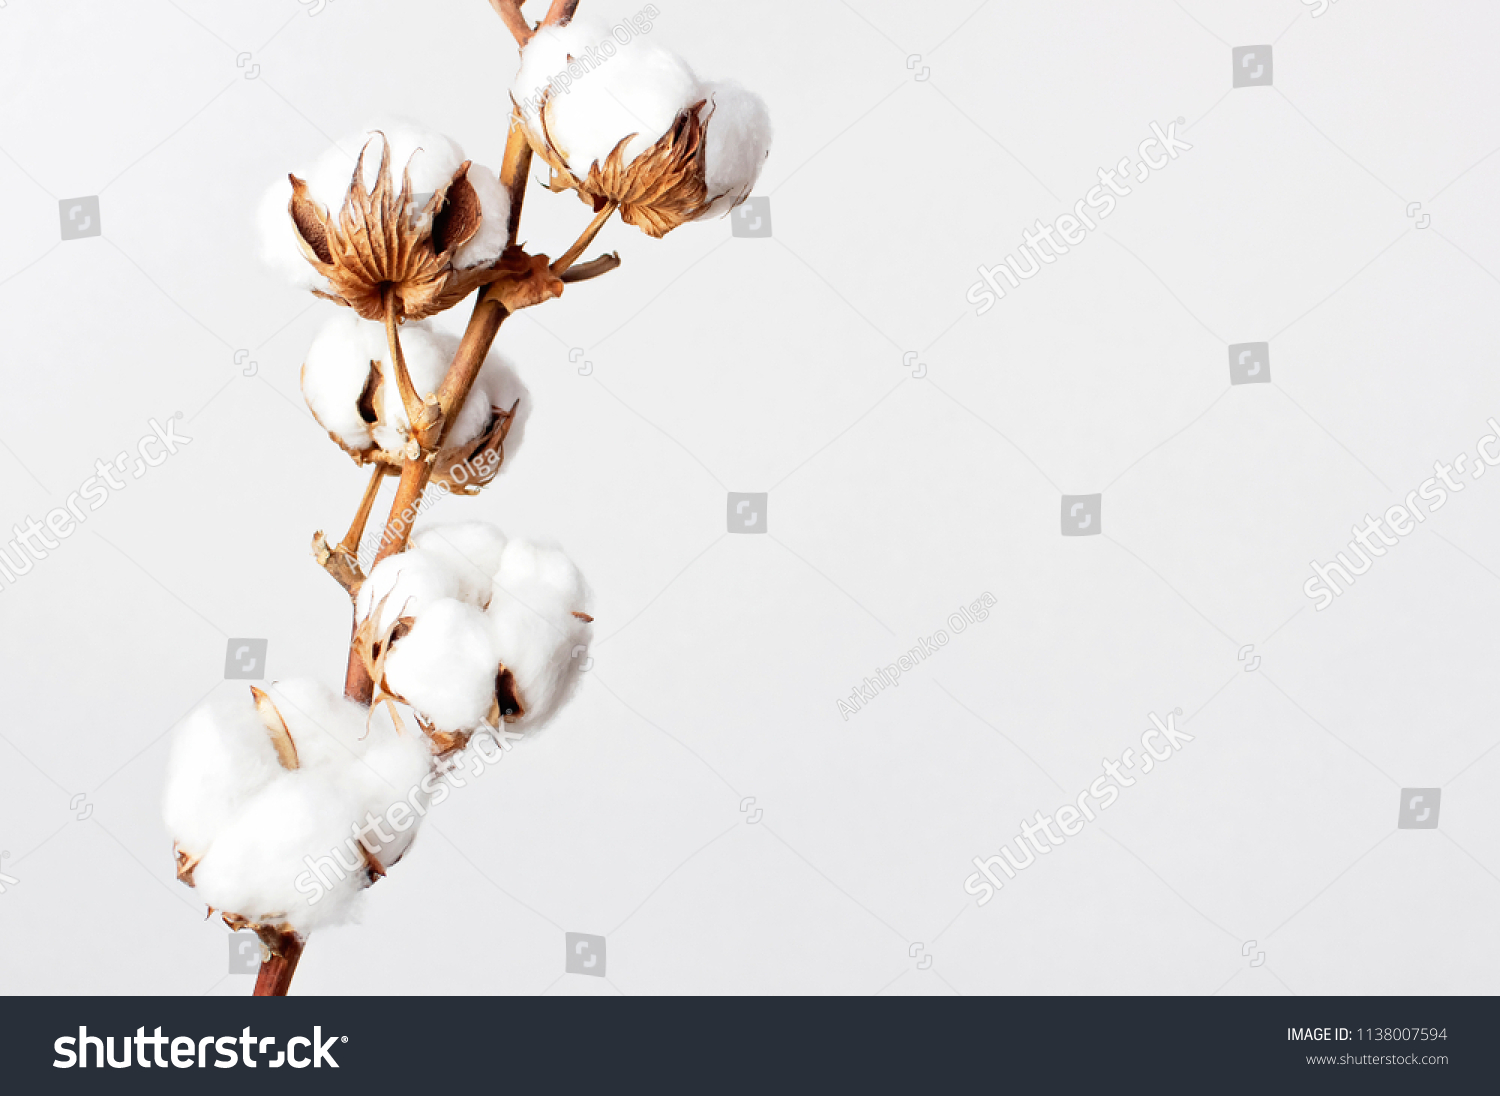 Cotton branch on white background. Delicate white cotton flowers. Light cotton background, flat lay. #1138007594